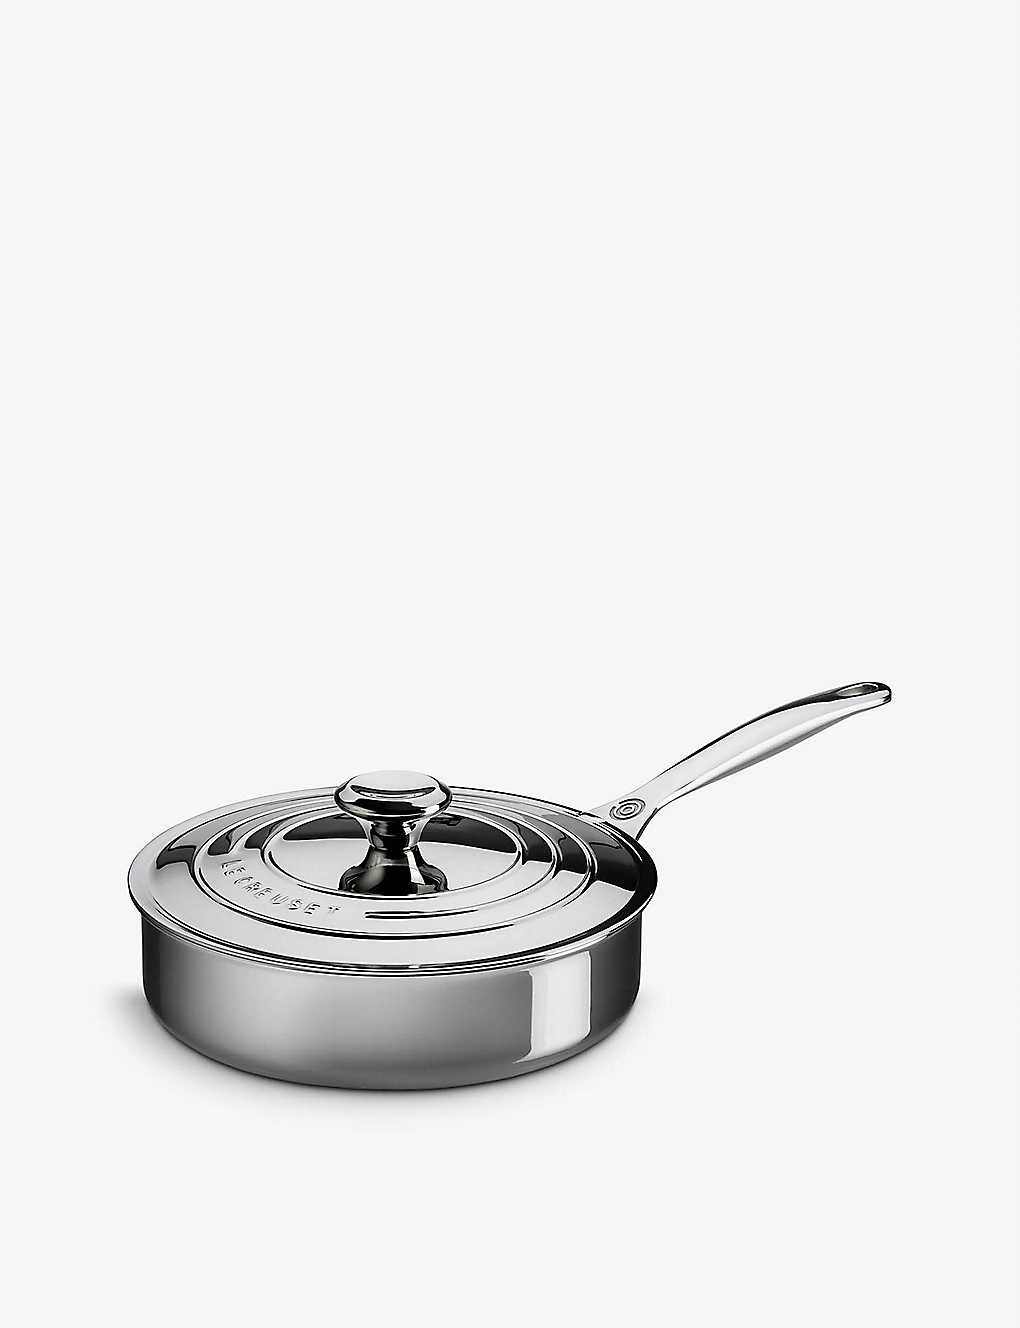 LE CREUSET アルミ&ステンレススチール ソースパン ウィズ リッド 24cm Aluminium and stainless-steel saut? pan with lid 24cm STAINLESS STEEL：Global Homes